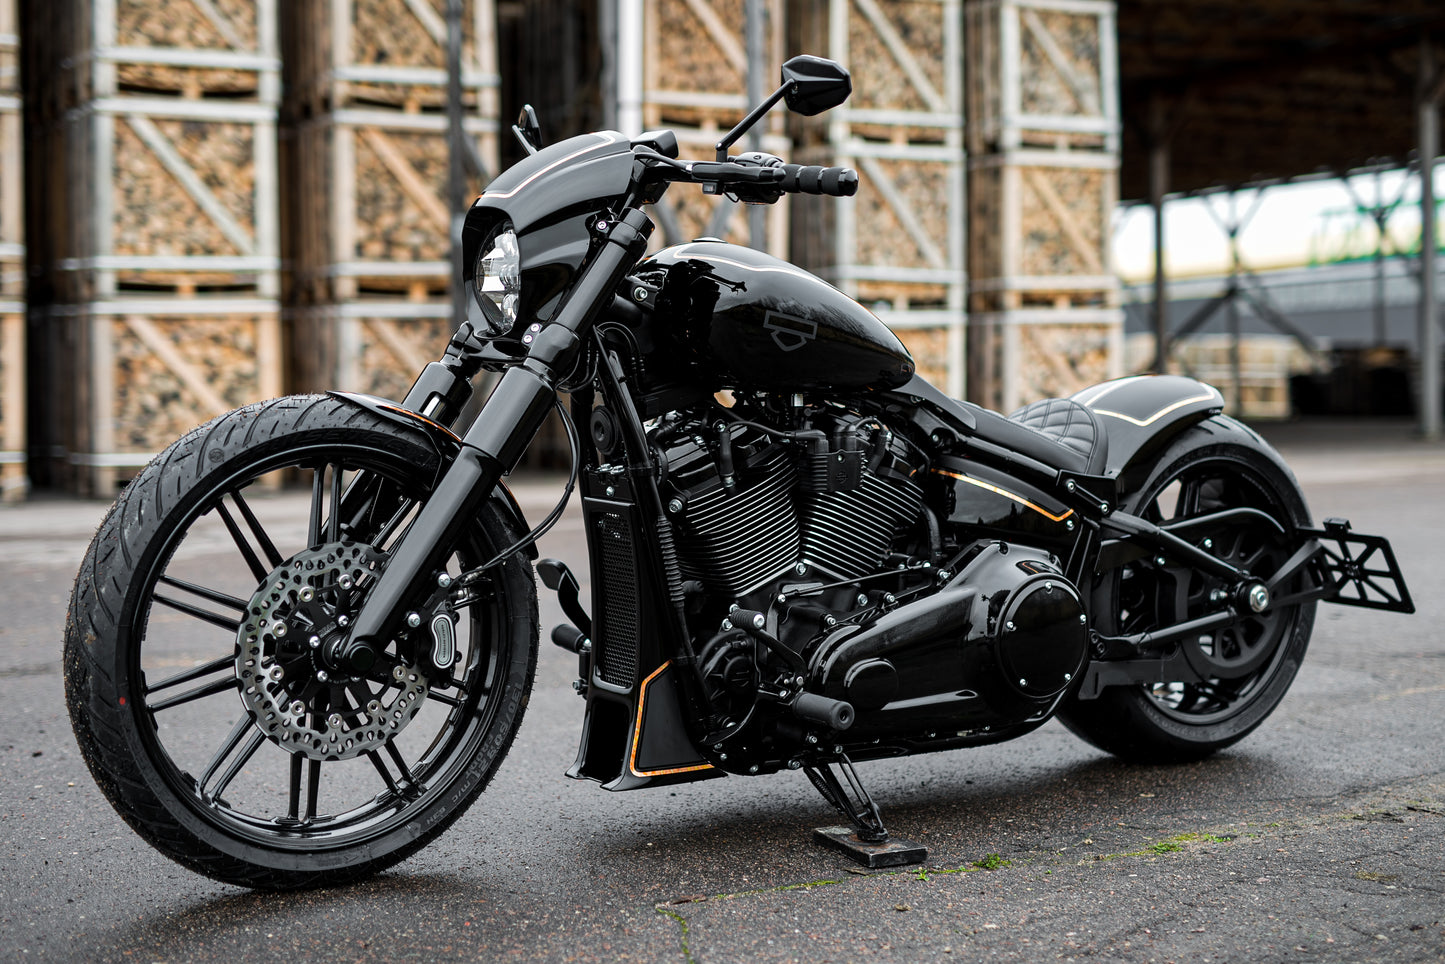 Harley Davidson motorcycle with Killer Custom "Aggressor" full fork cover set from the side in an industrial environment